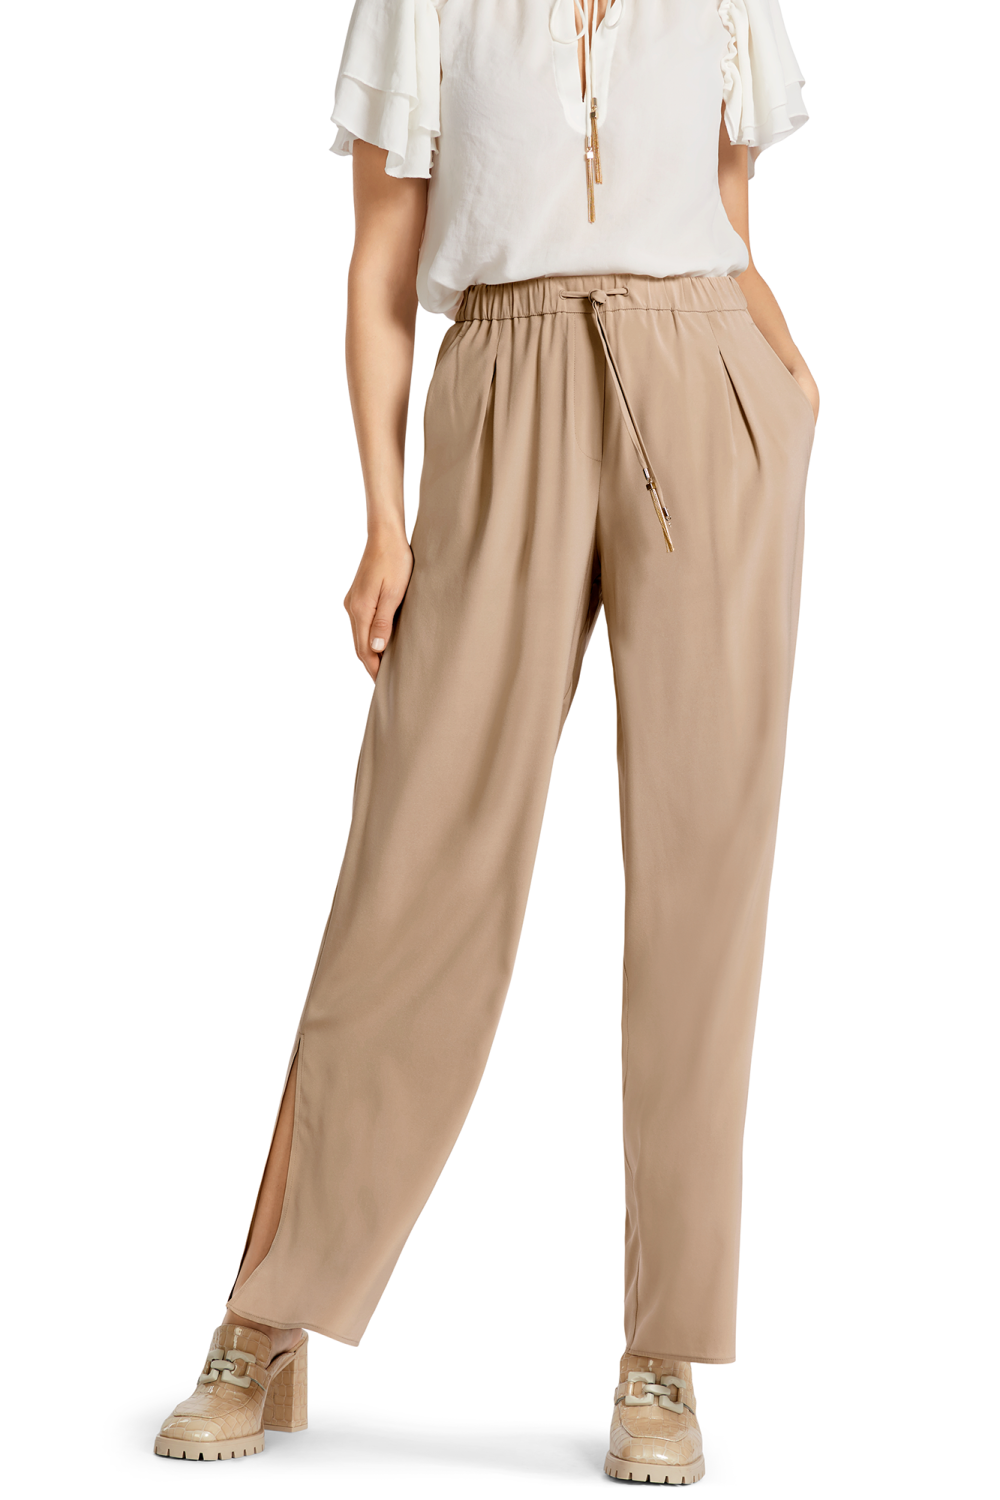 Deep Sand Pants With Bottom Slits from Marc Cain offer a distinguished style with their luxurious silk drape and waist pleats. 